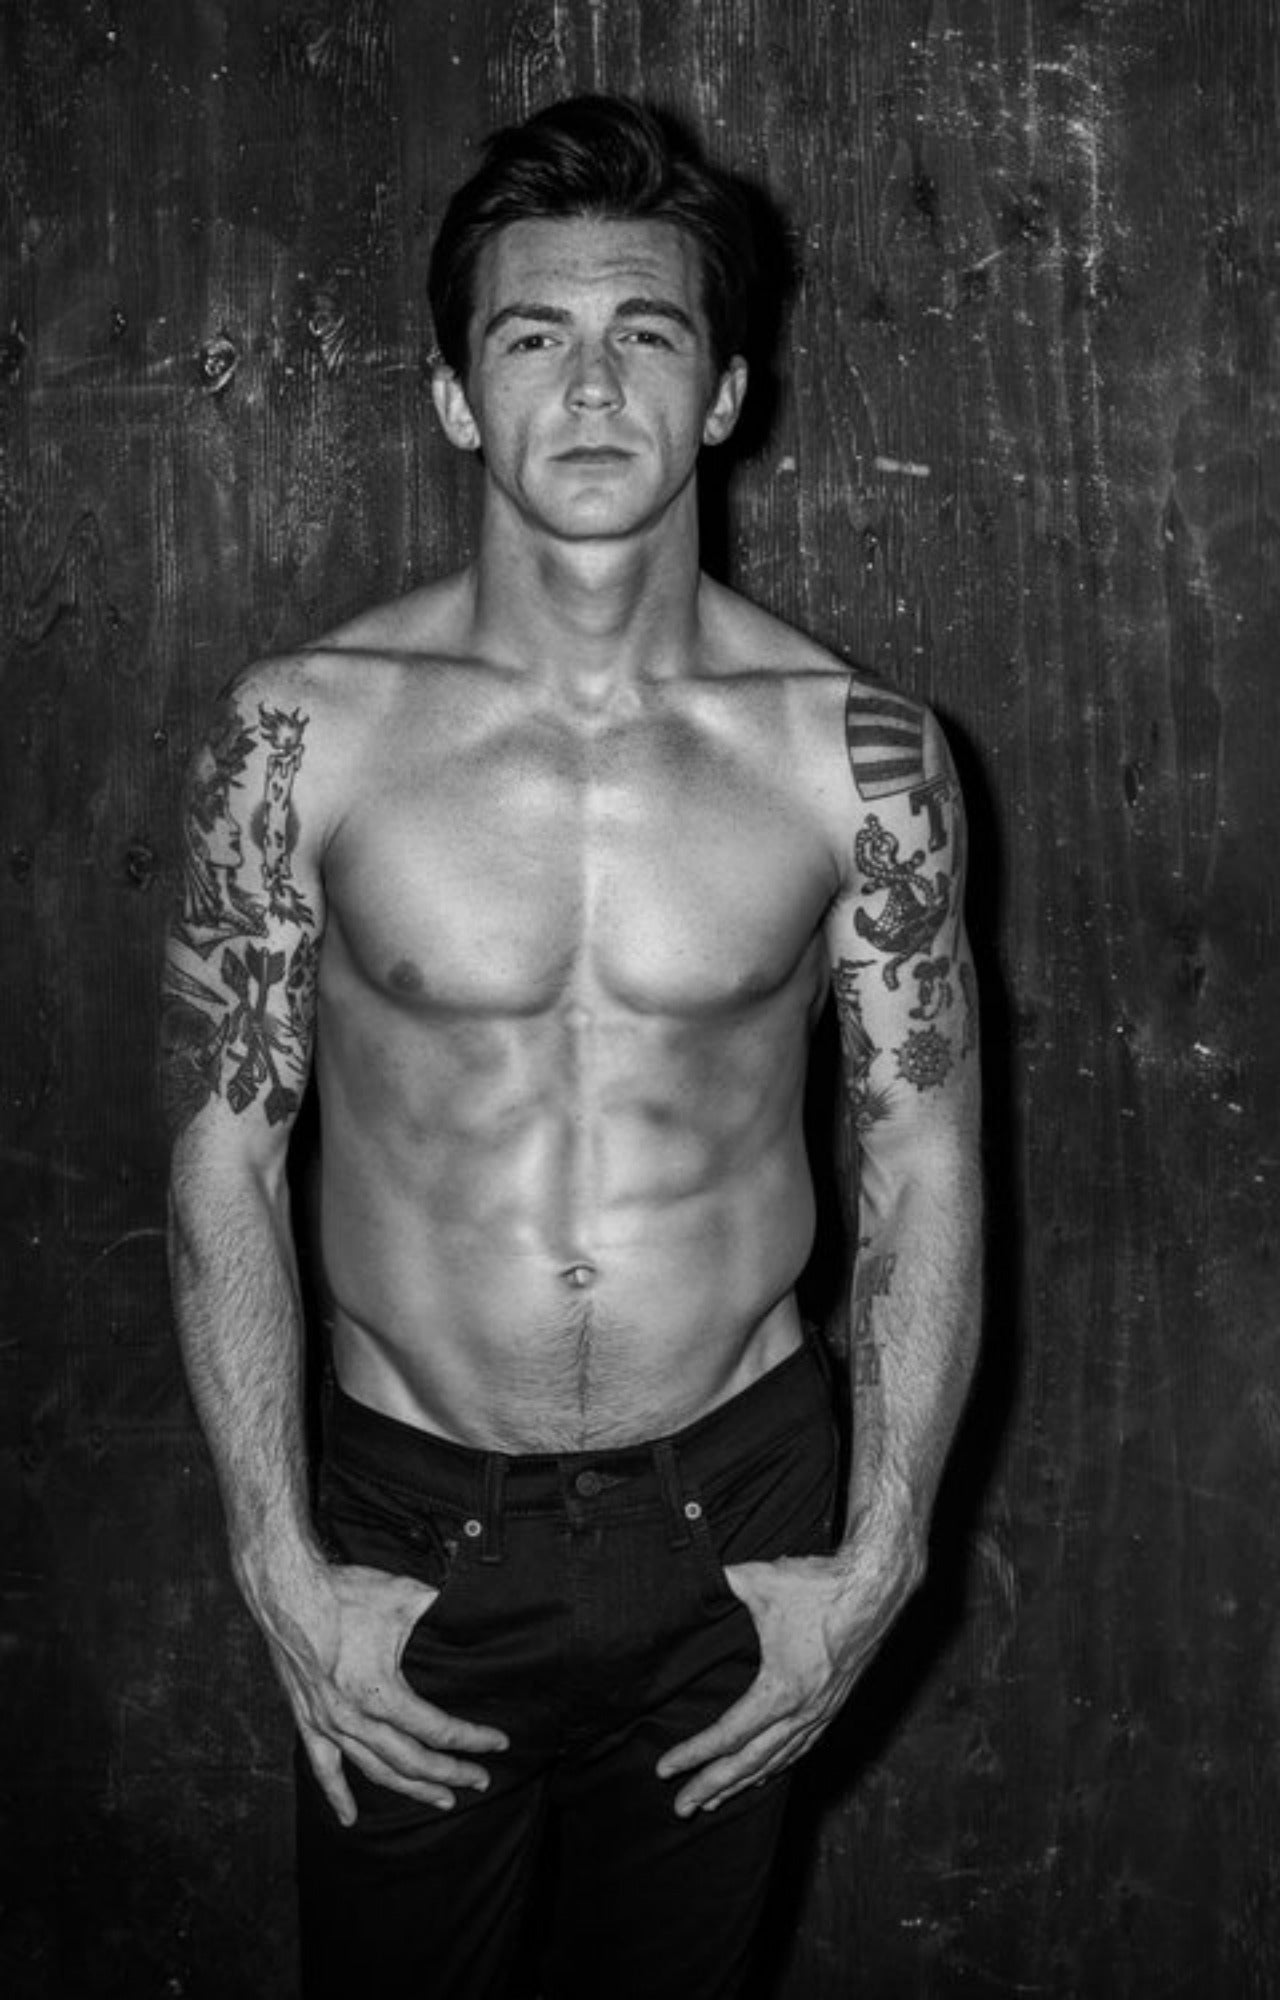 Drake Bell Shows Off Six-Pack Abs Amid Feud With 'Drake & Josh' Co-Star